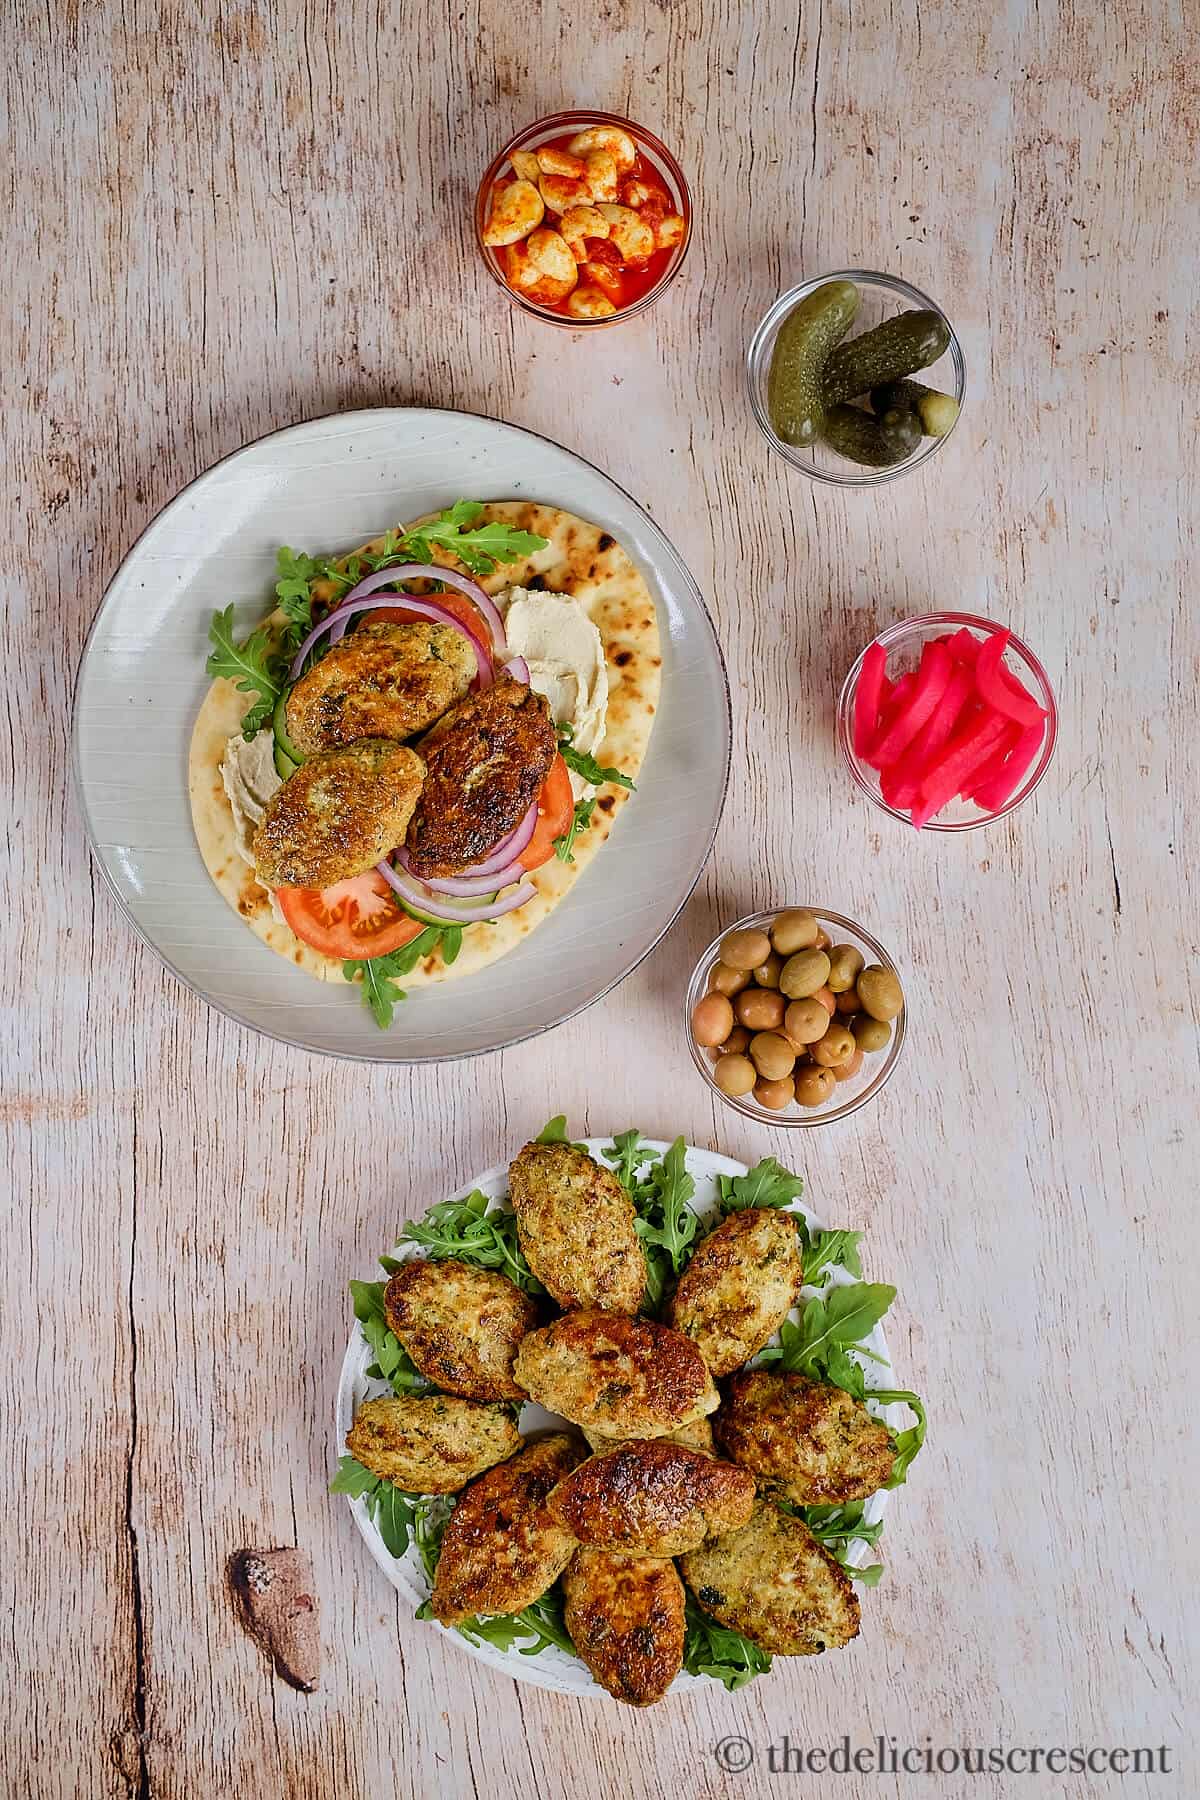 Chicken koftas served with bread, vegetables and pickles.